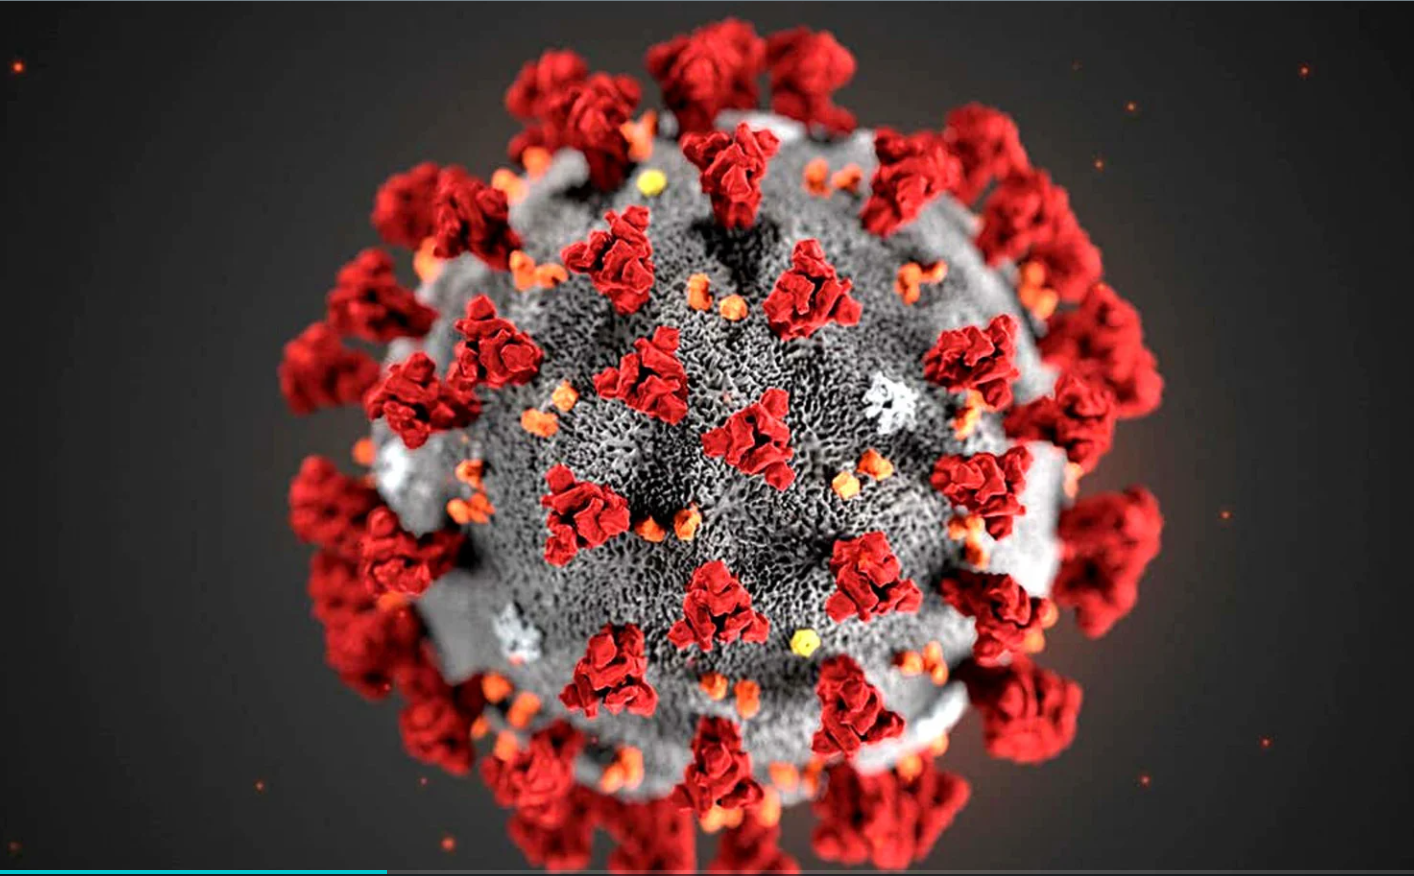 A circular shape of the Coronavirus, with triangular shapes protruding from its surface. The coronavirus can cause a physician disability and financial hardship long after a COVID diagnosis fades away.